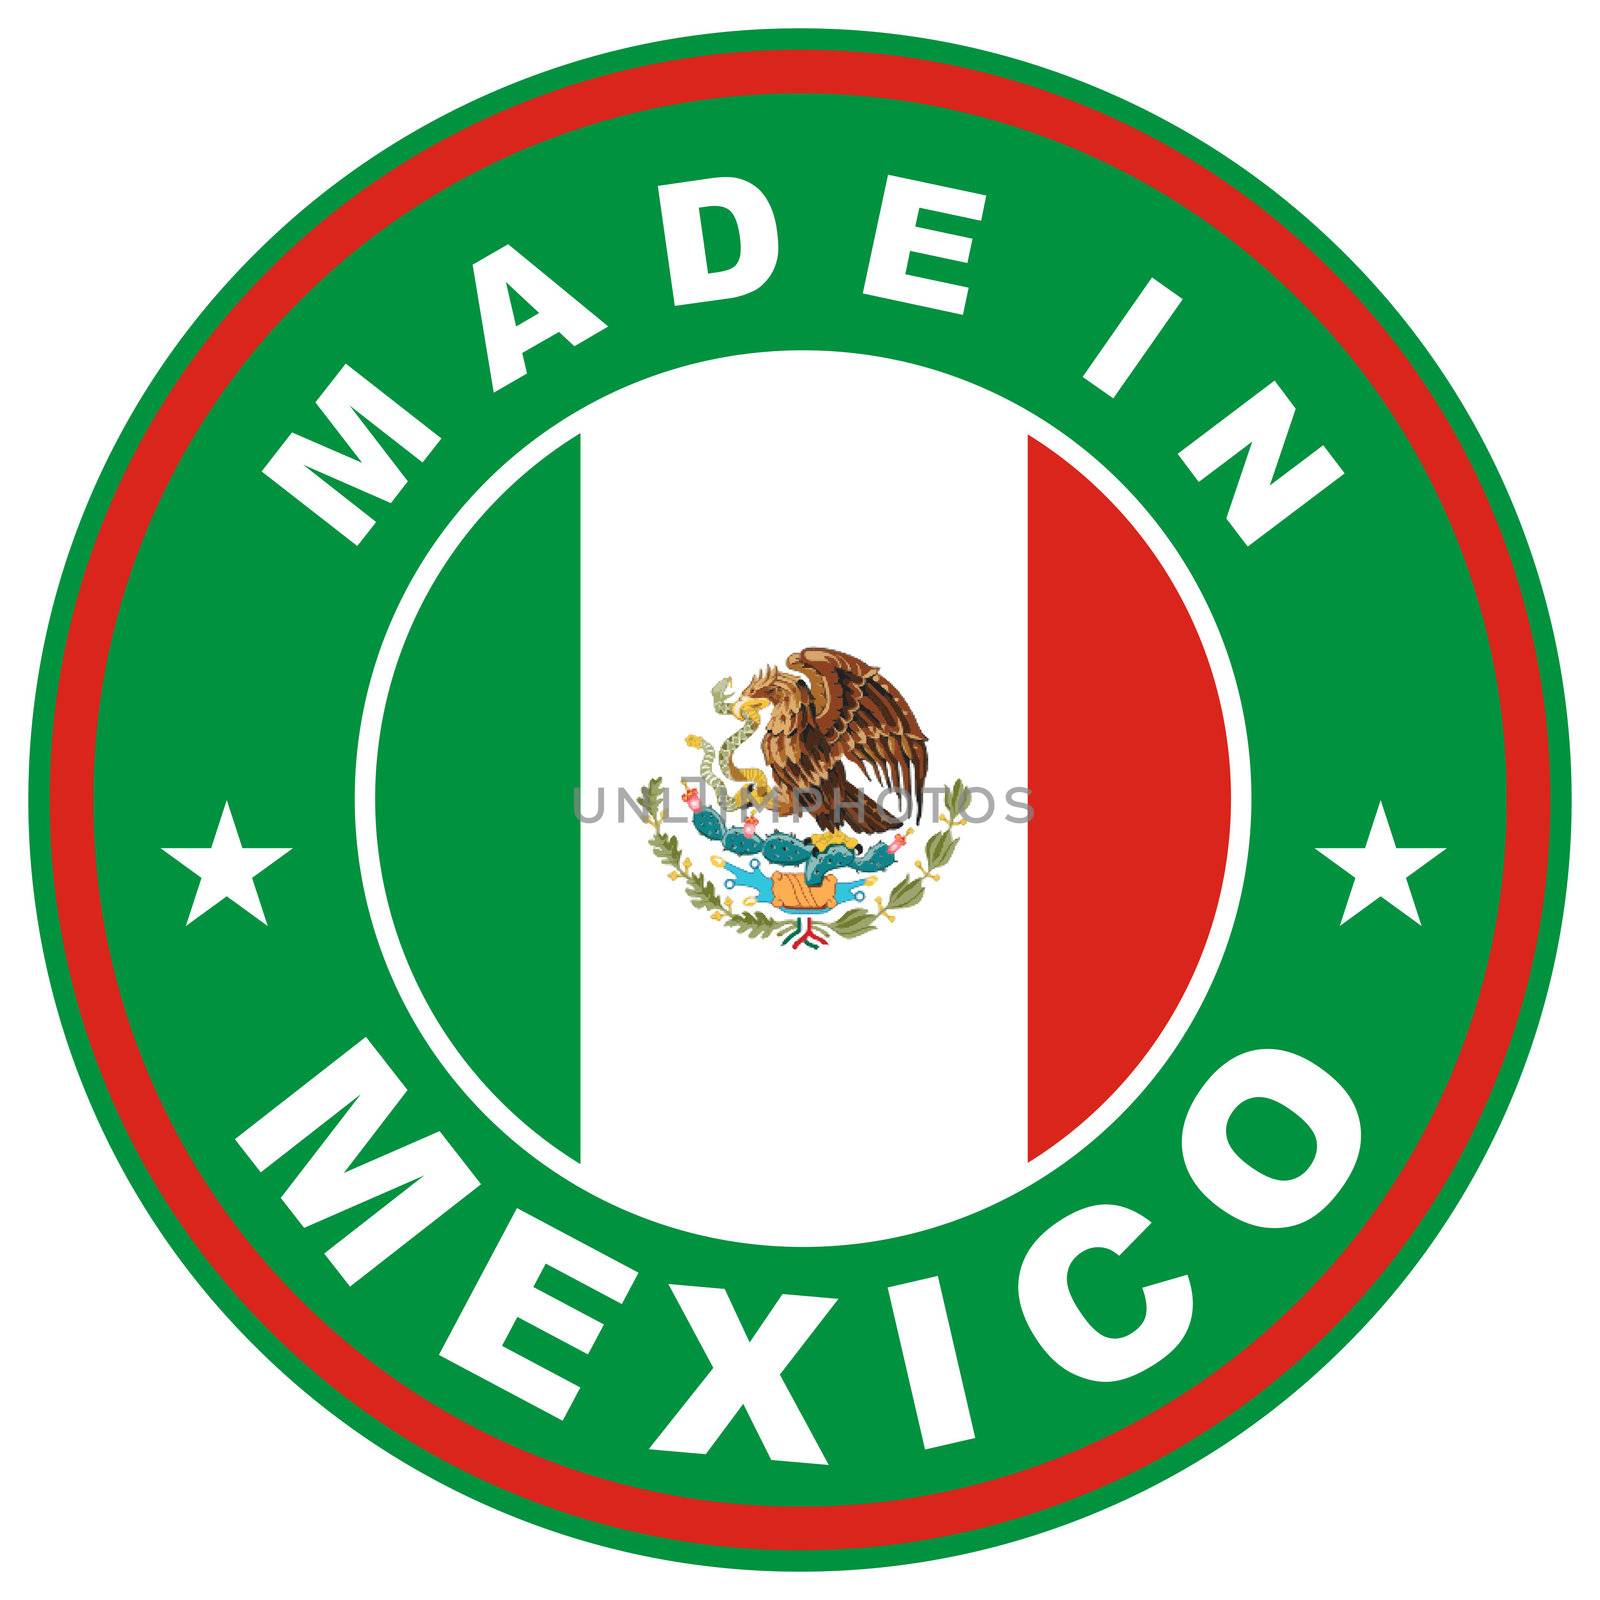 very big size made in mexico country label